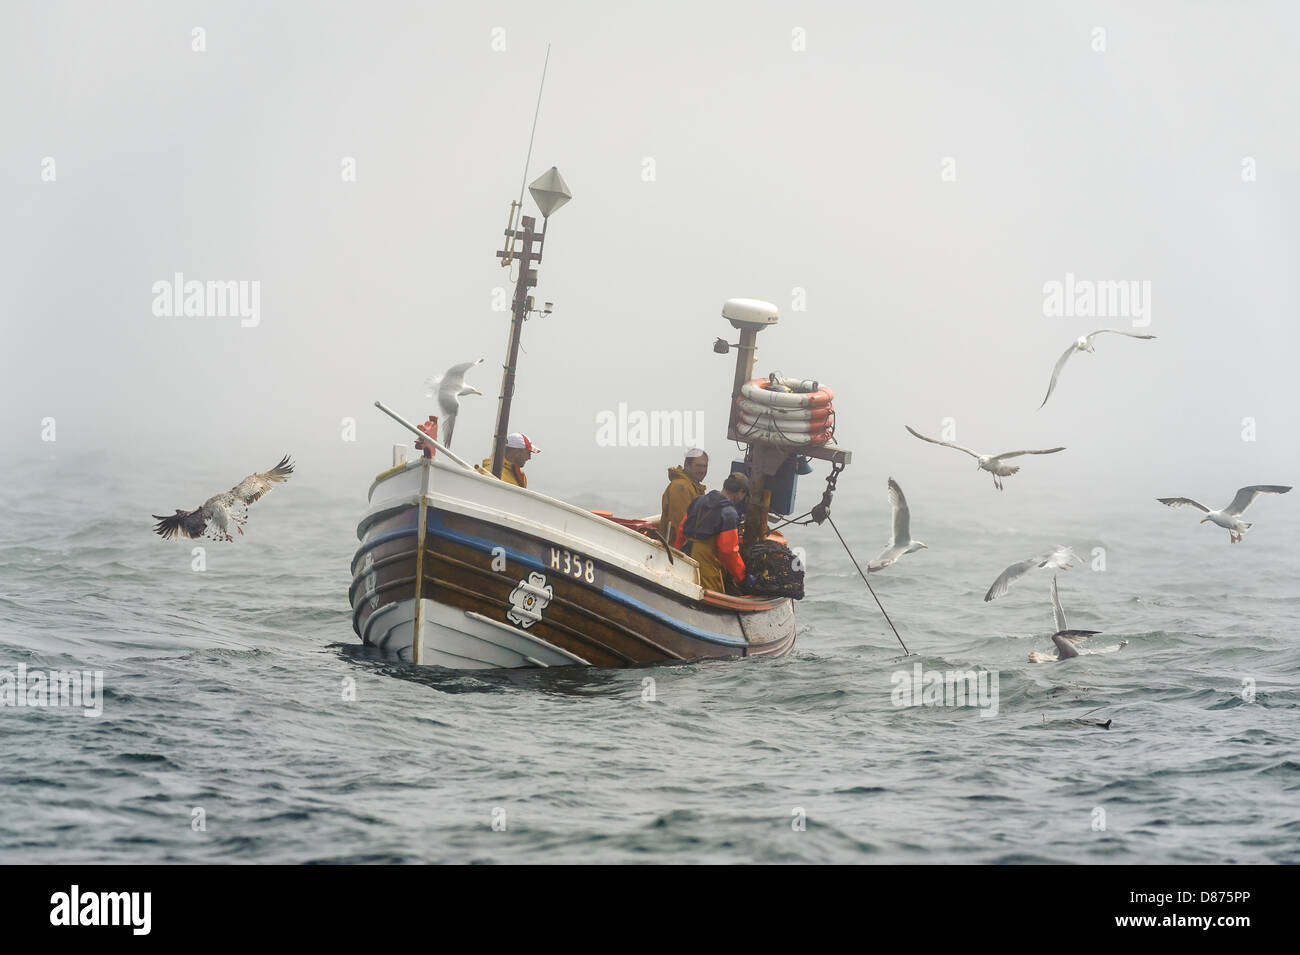 Gulls fight for scraps as three lobster fishermen in a boat ply their trade off the North Sea coast, East Riding of Yorkshire. Stock Photo